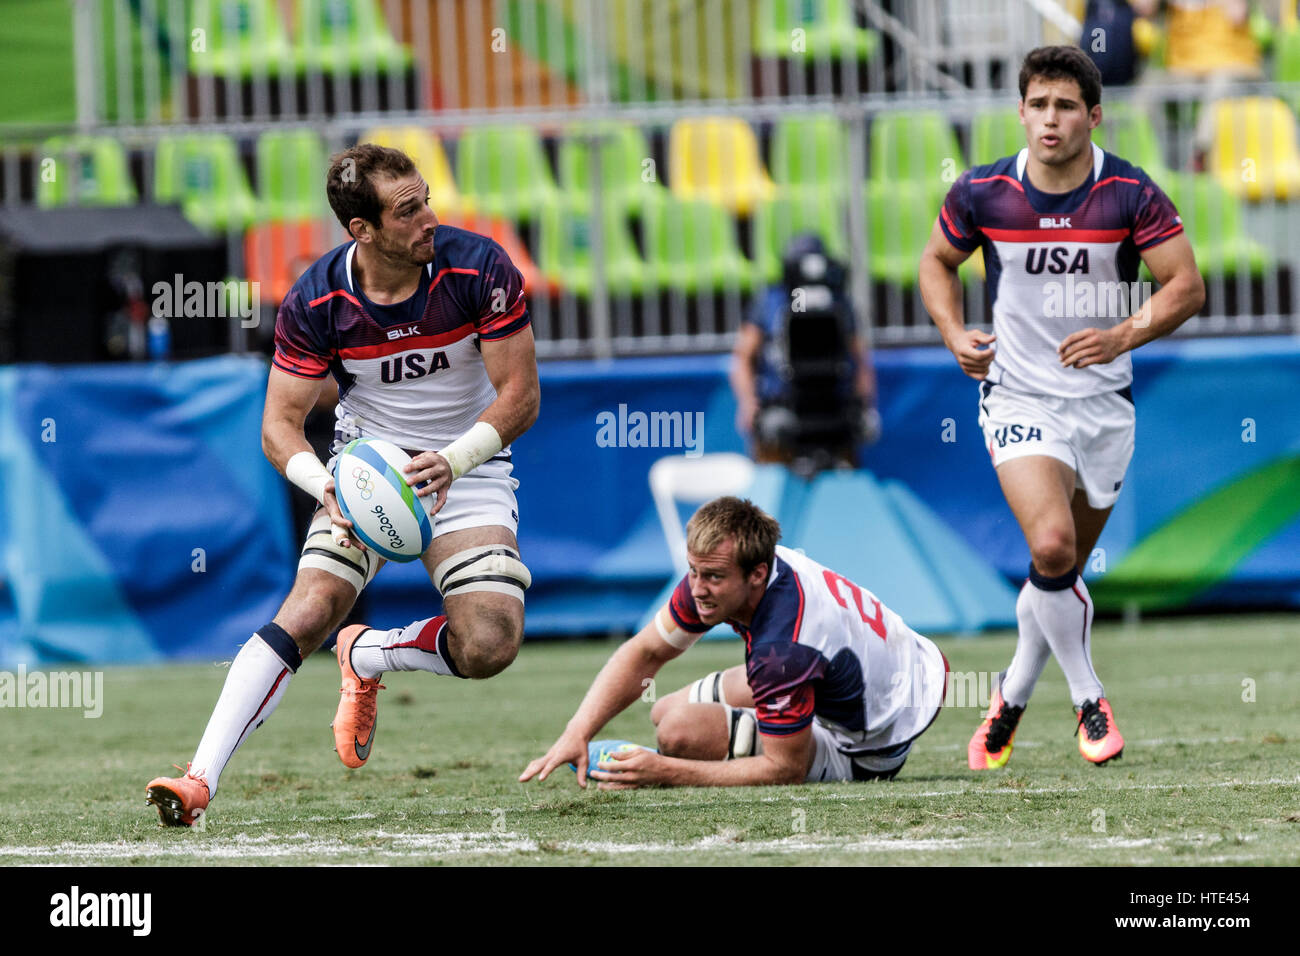 Rio de Janeiro, Brazil. 11 August 2016 Zack Test (USA), with ball,  competes in the Men's  Rugby Sevens in a match vs. Spain at the 2016 Olympic Summe Stock Photo